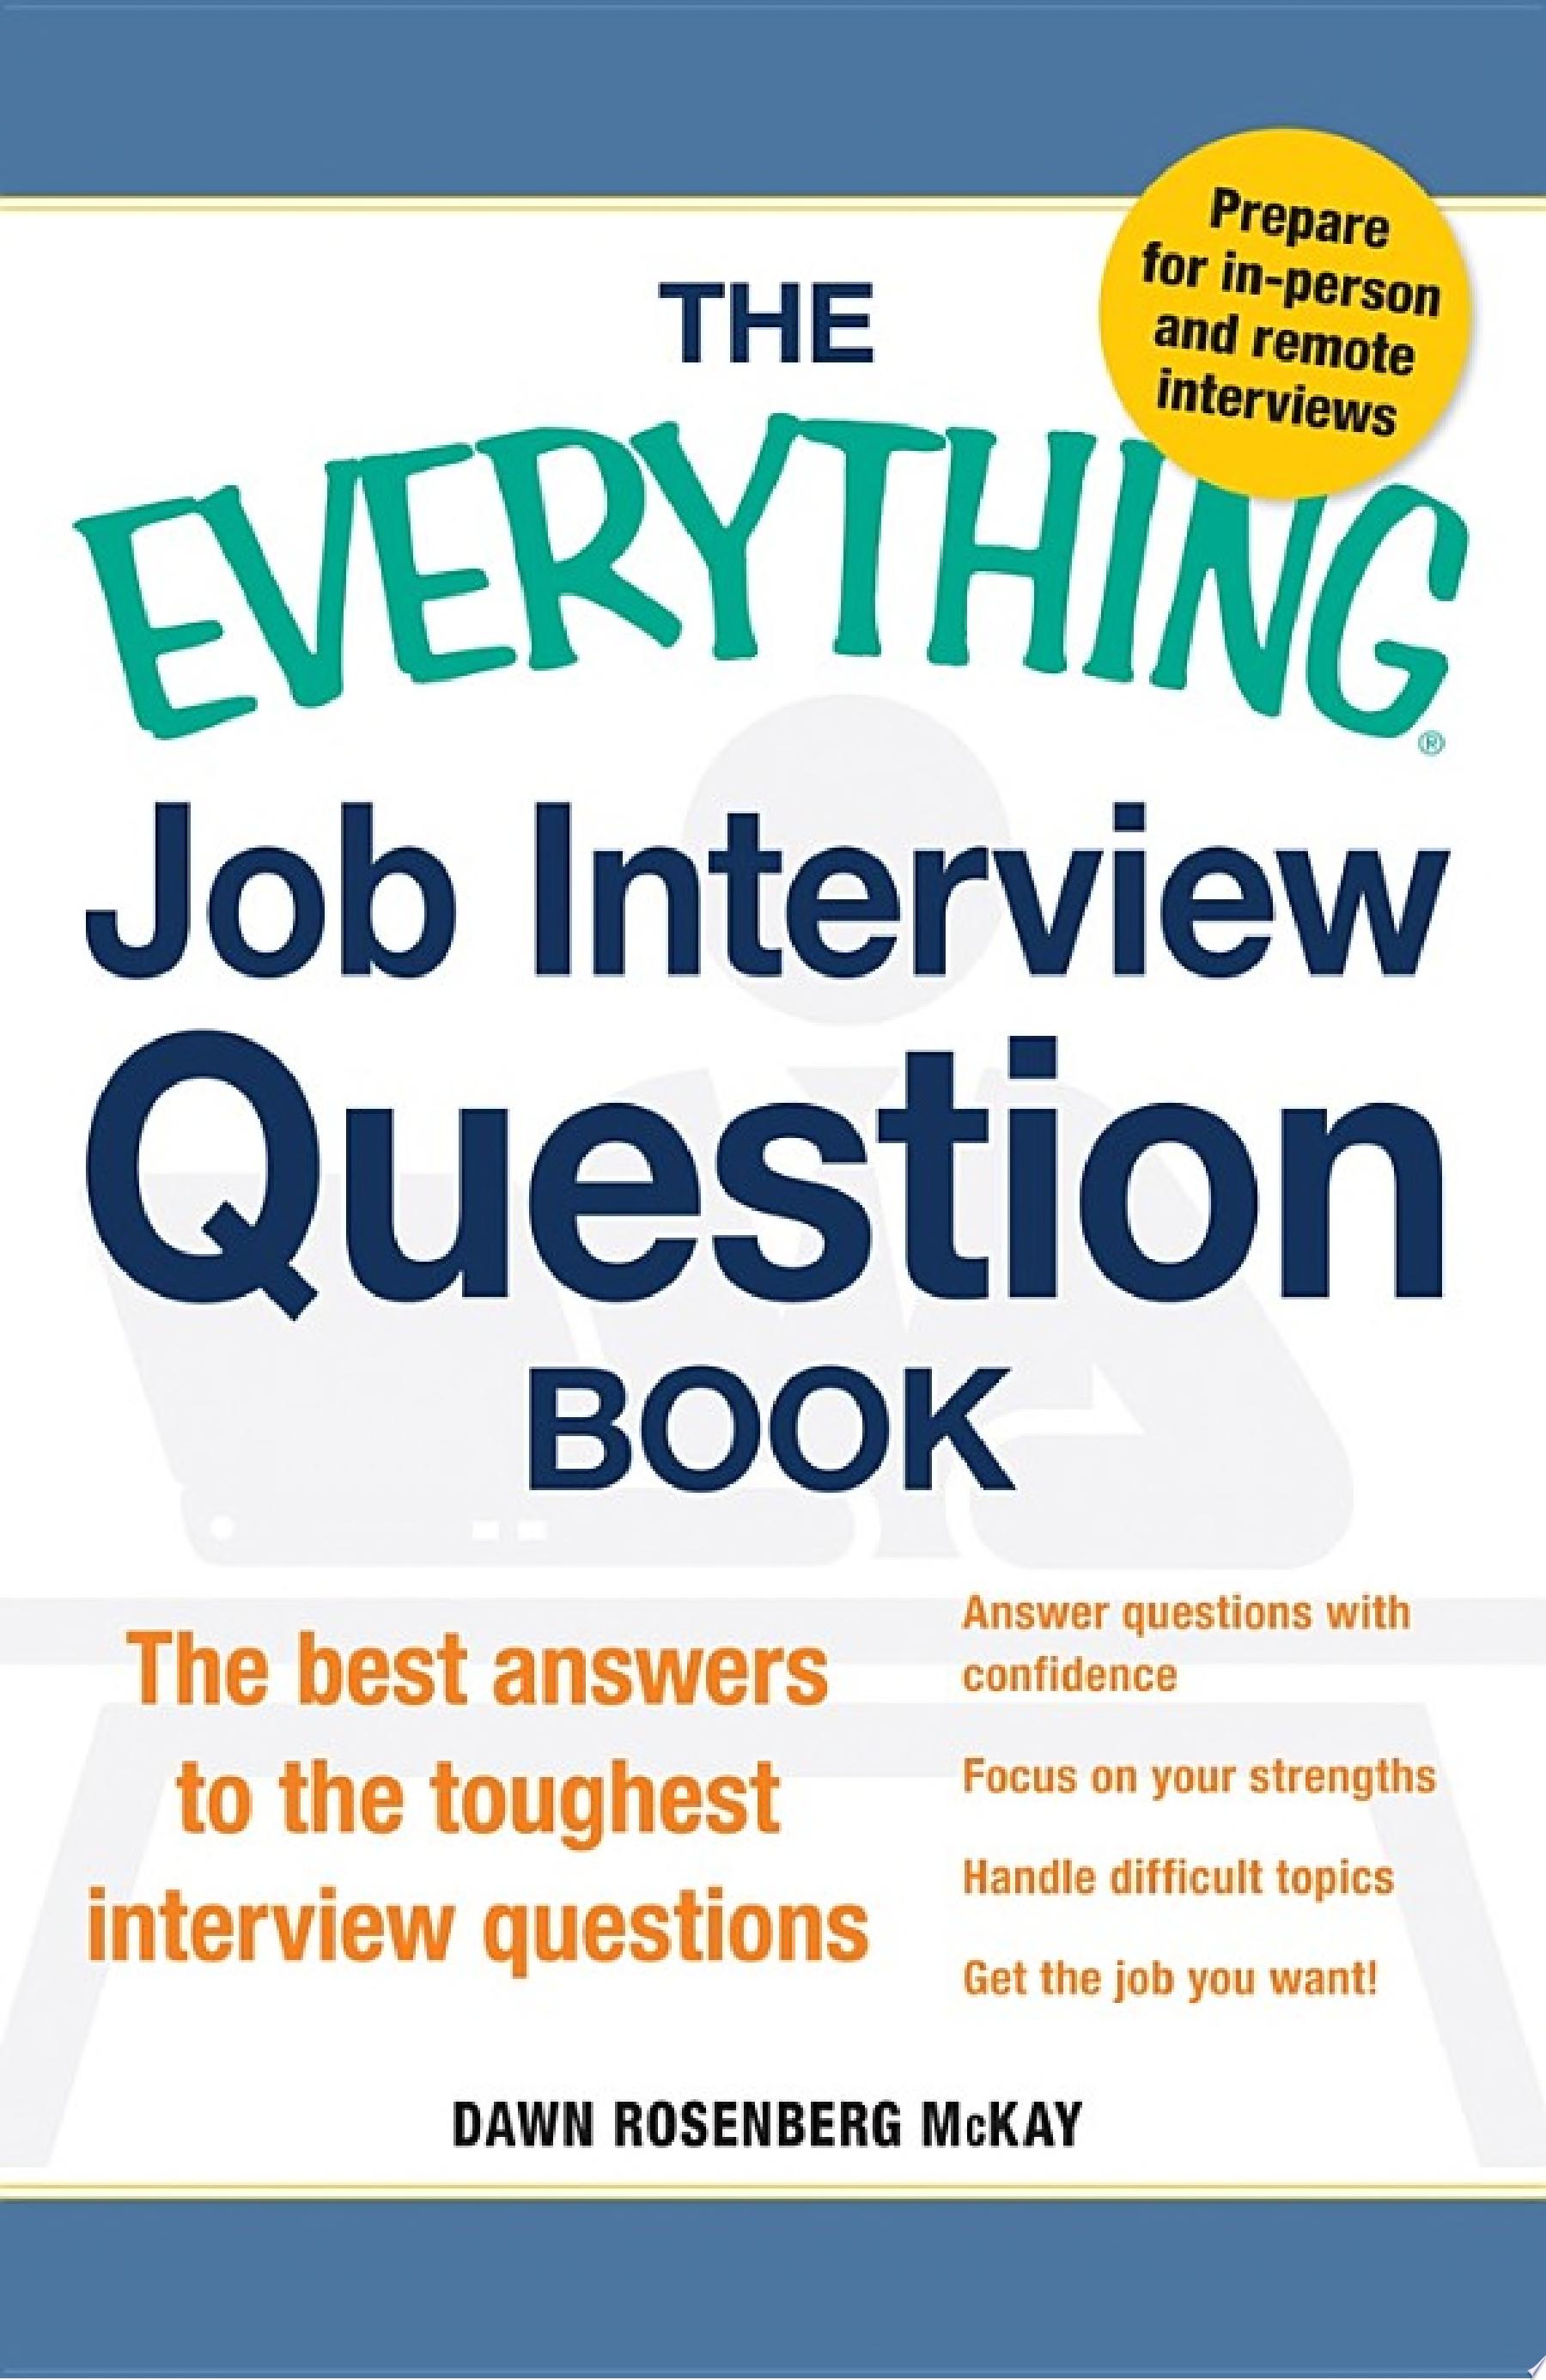 Image for "The Everything Job Interview Question Book"